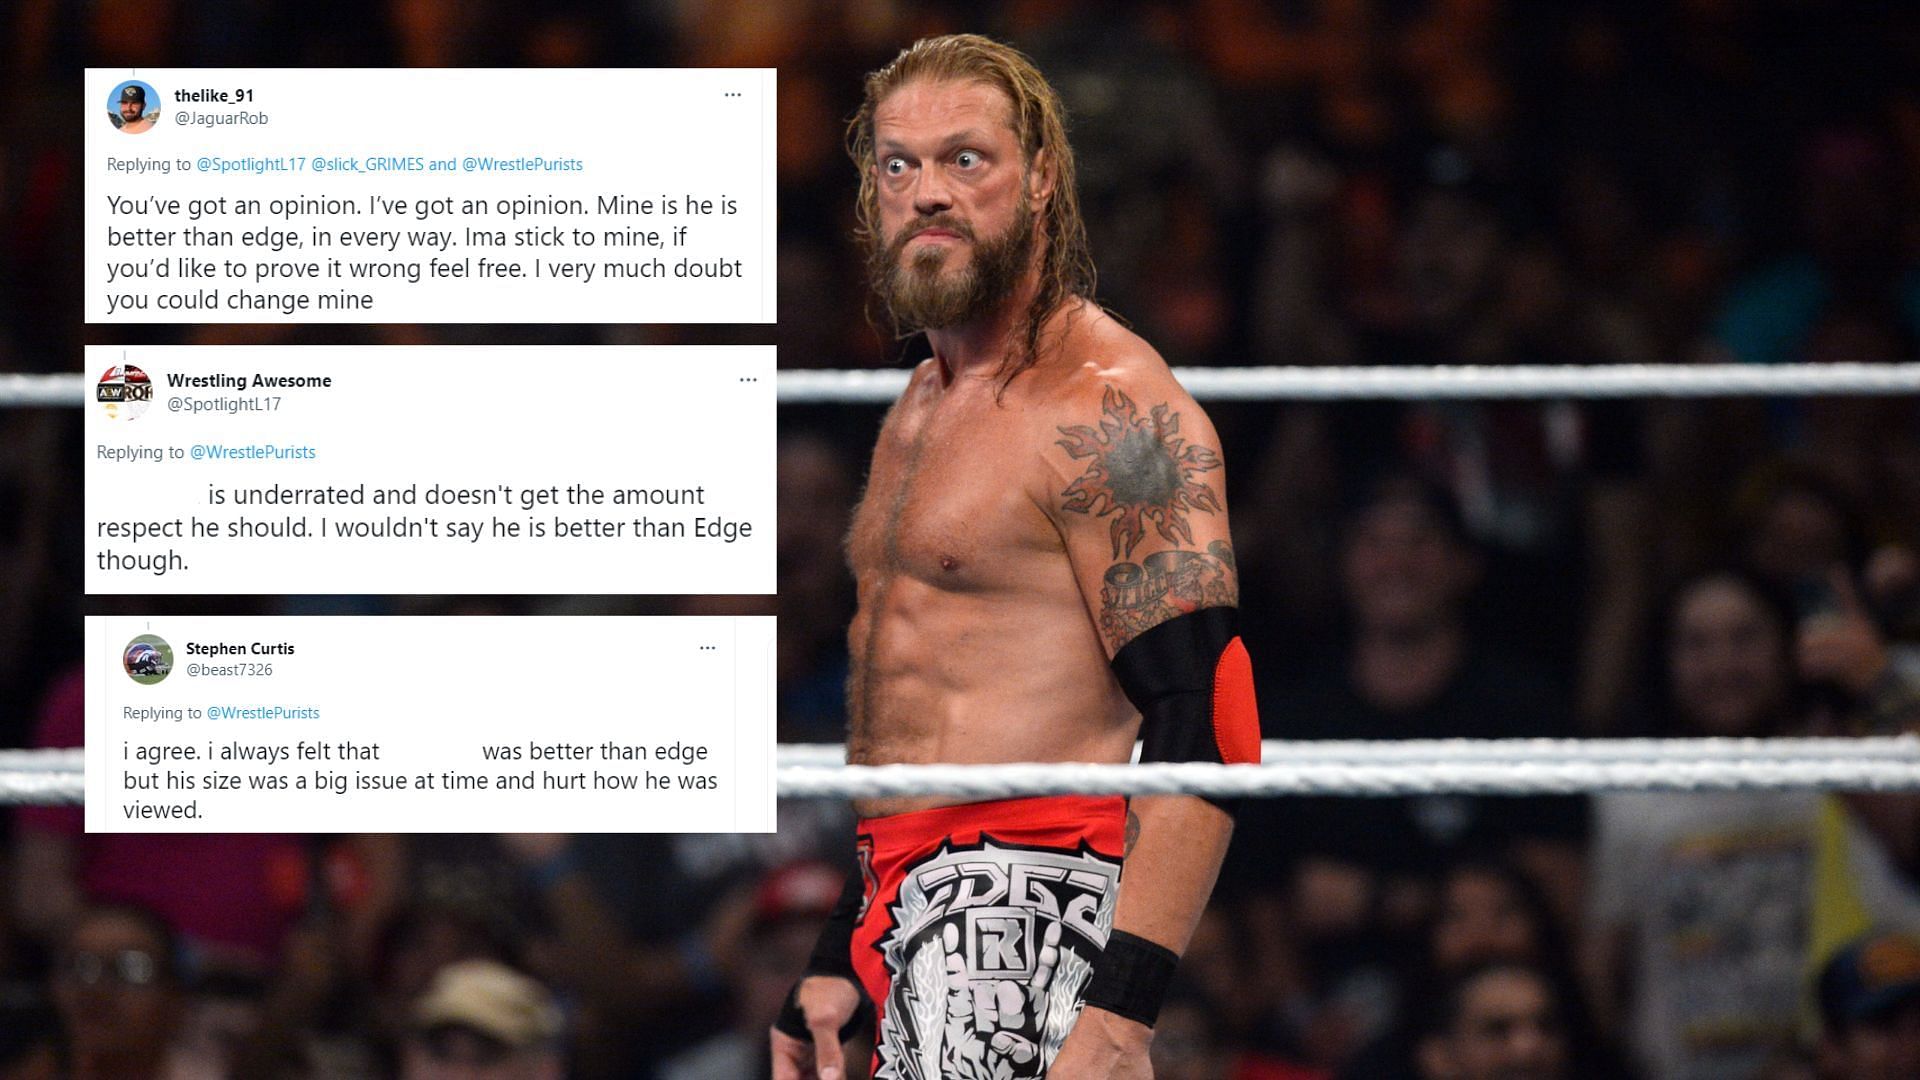 Some fans stated that this AEW star was better than WWE Hall of Famer Edge.